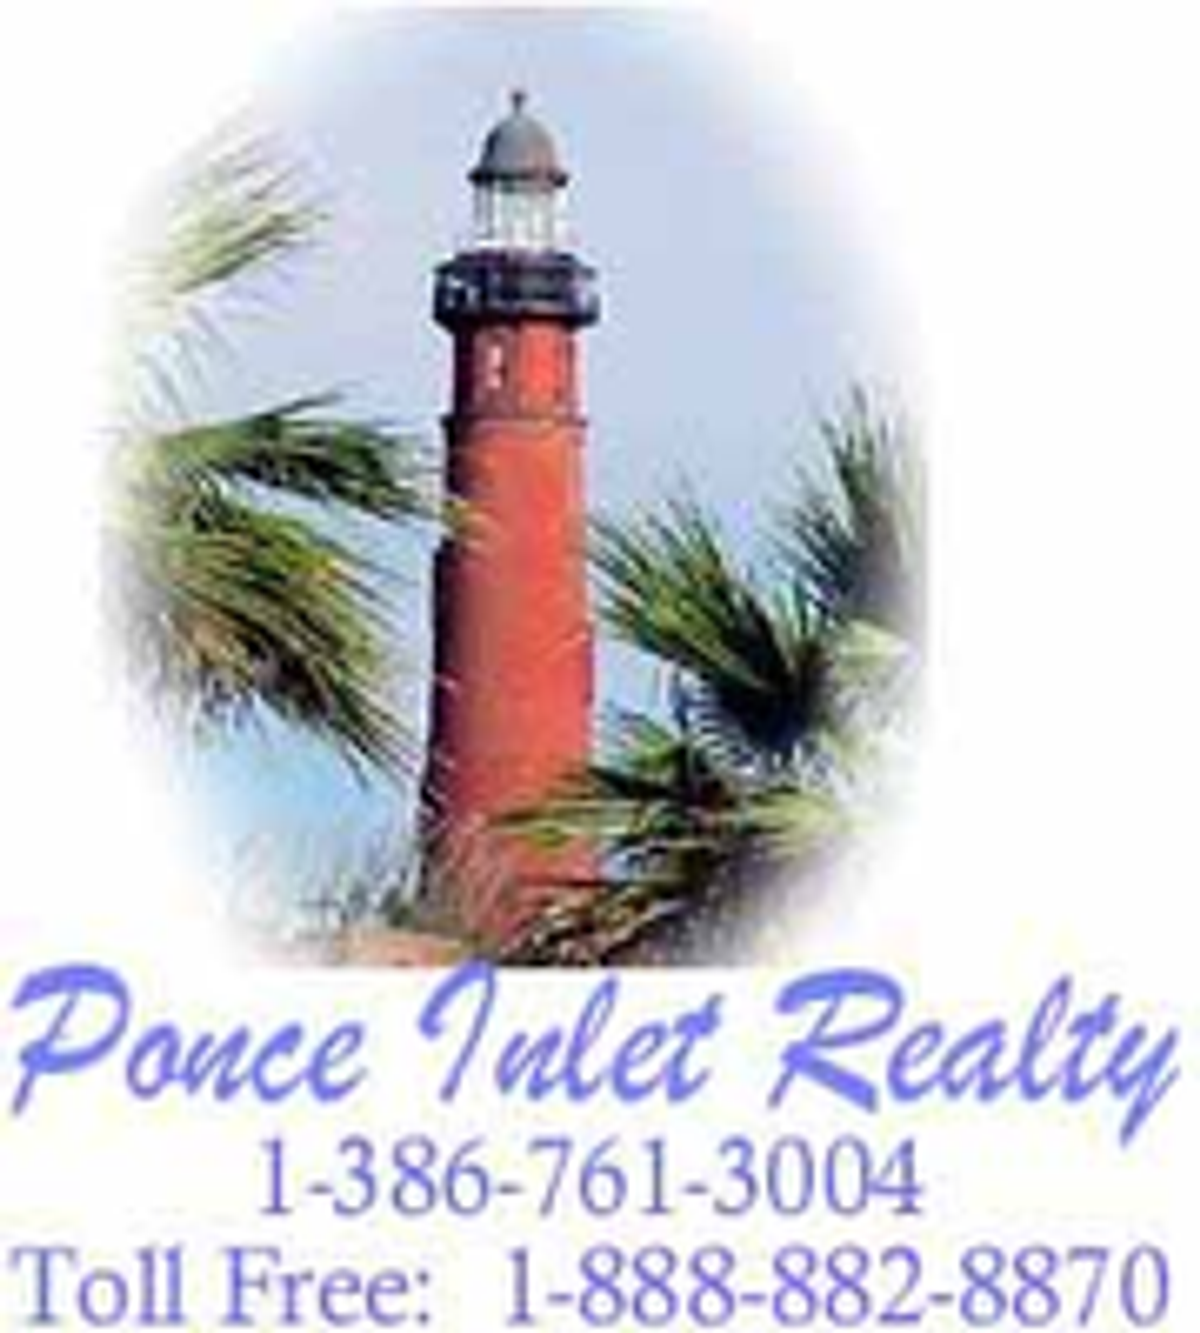 Photo for Terri Spruck, Listing Agent at Ponce Inlet Realty, Inc